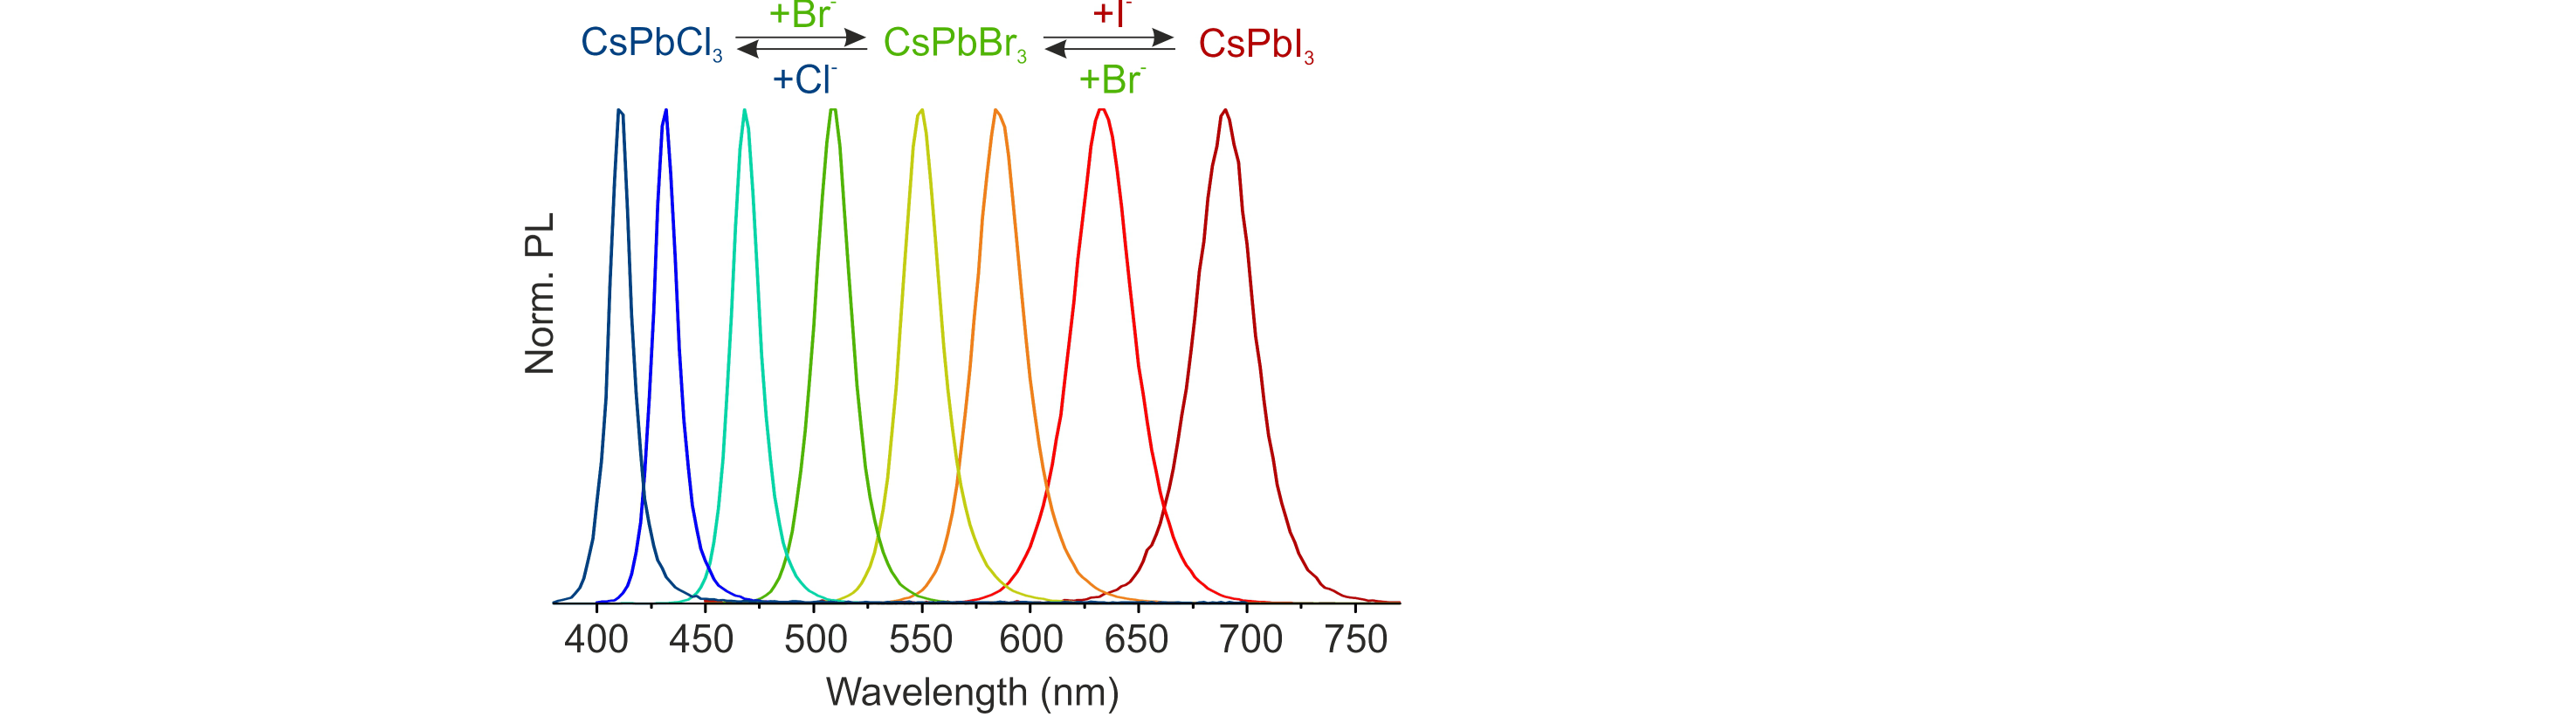 Fast Anion-Exchange in Highly Luminescent Nanocrystals of Cesium Lead Halide Perovskites (CsPbX3, X=Cl, Br, I)